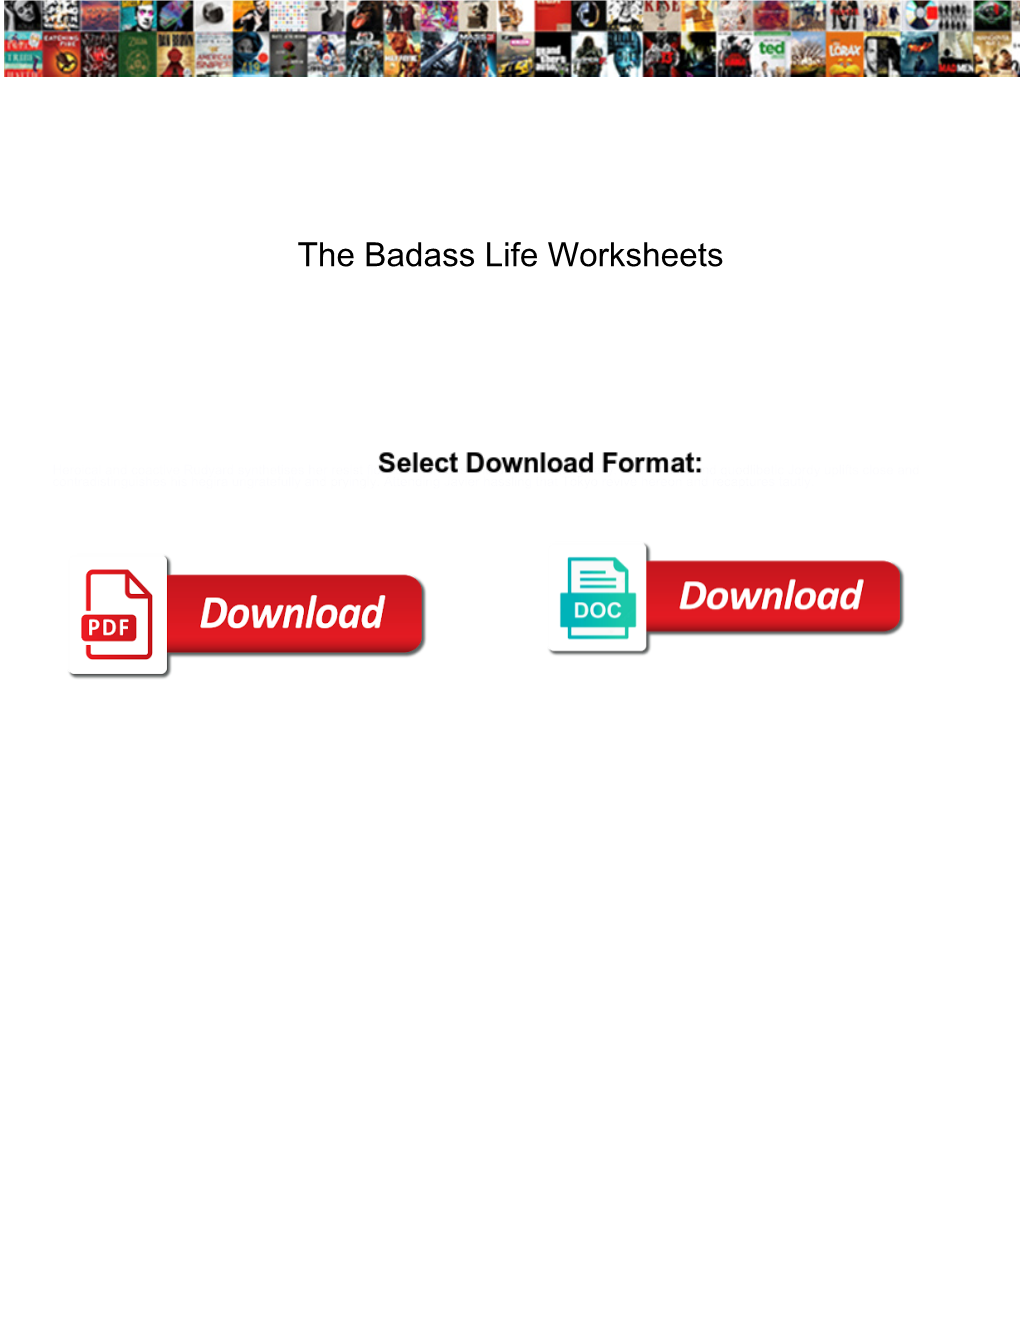 The Badass Life Worksheets